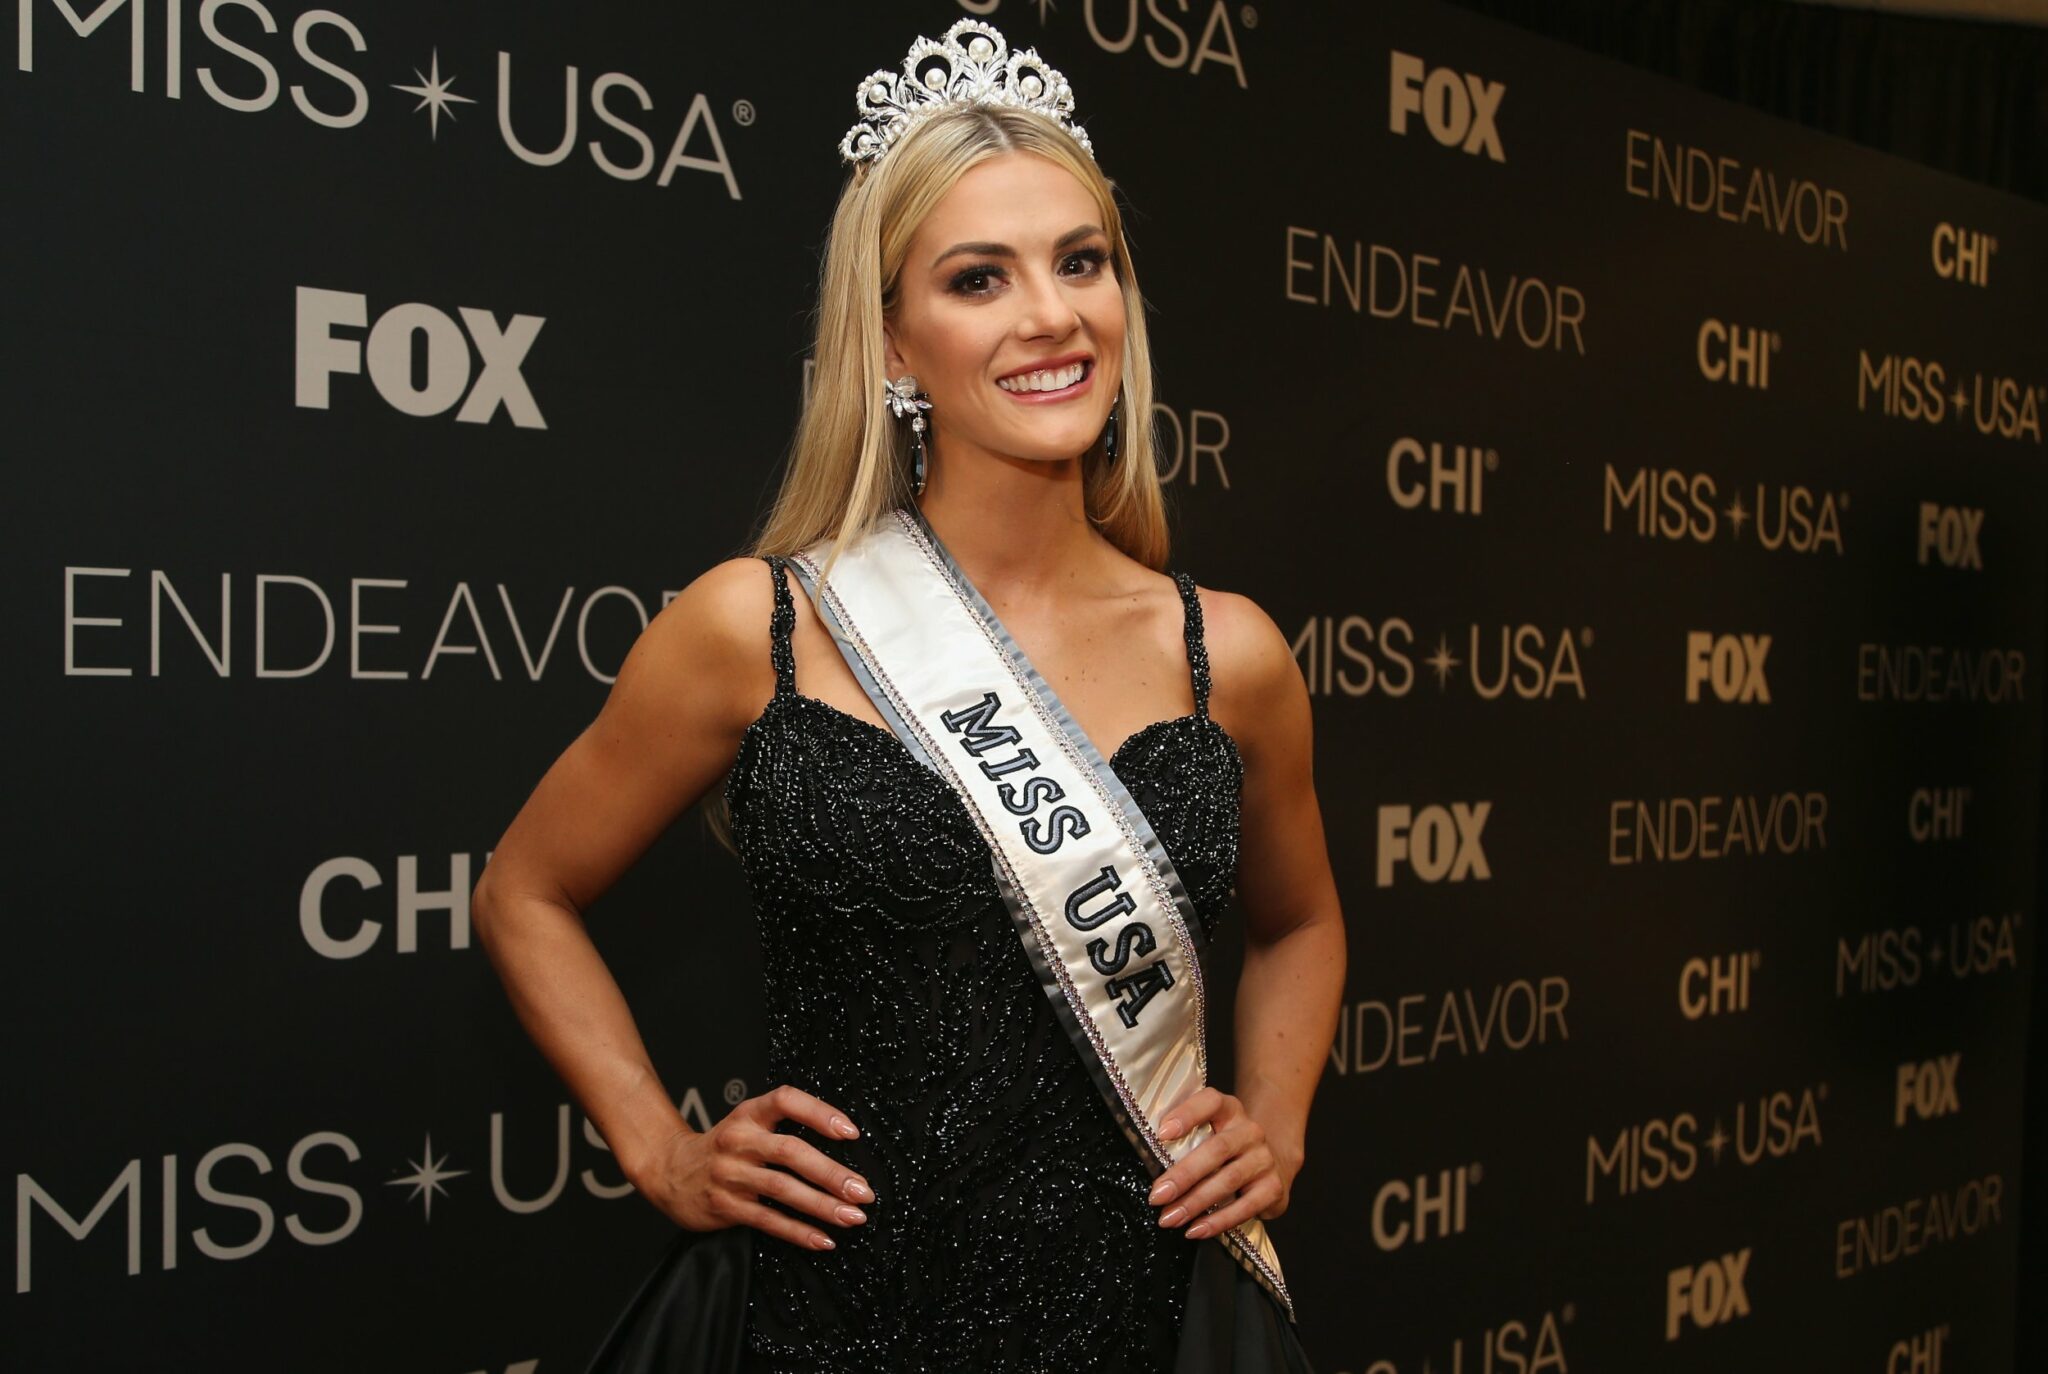 how do judges select contestants for the miss america pageant